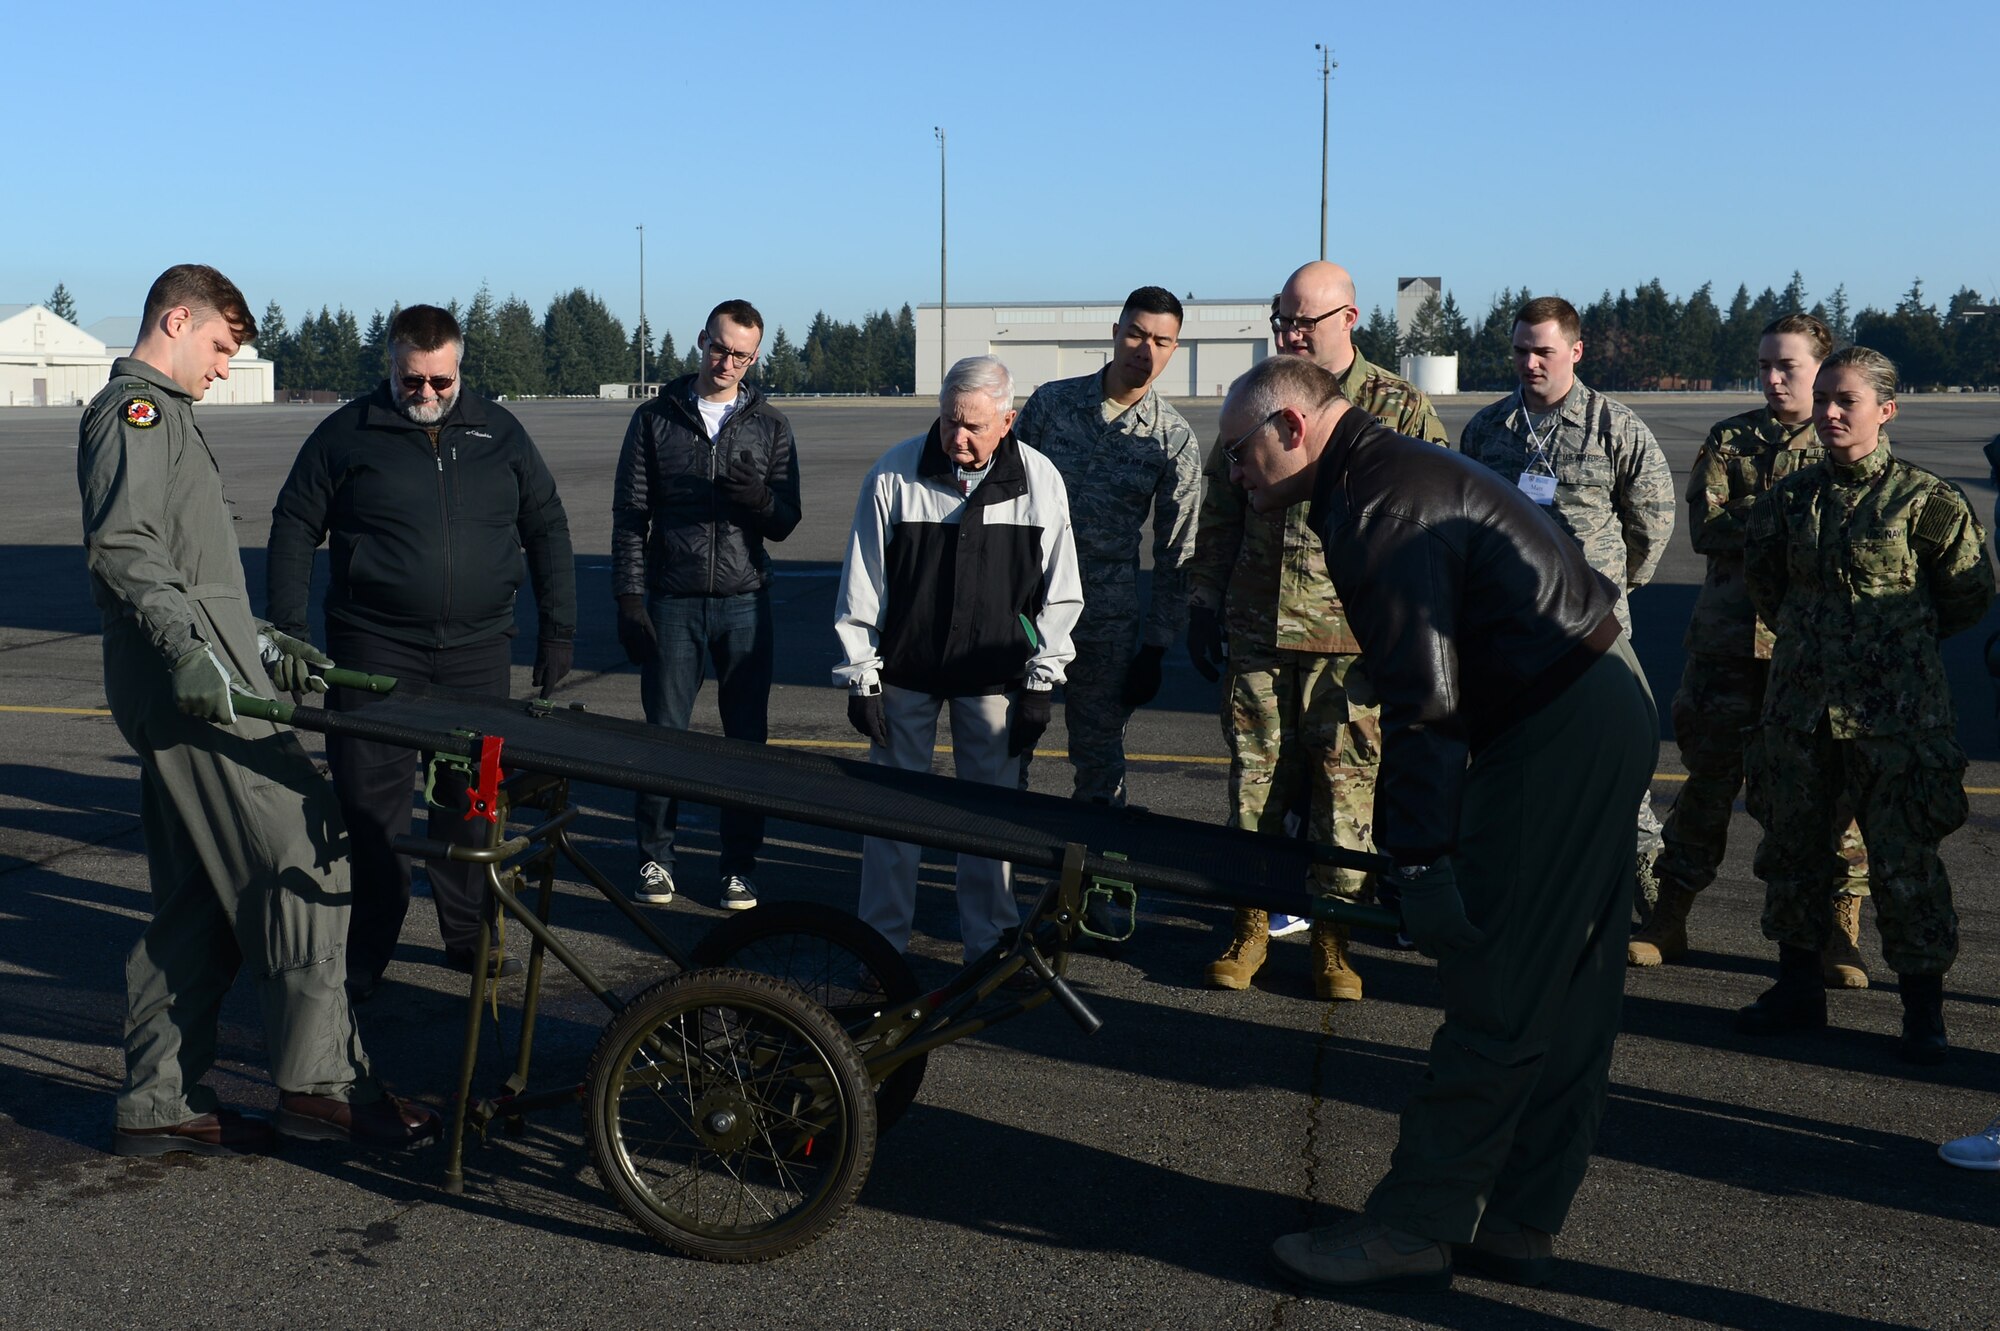 Members of the Association of Military Osteopathic Physicians and Surgeons (AMOPS) practice using a NATO litter carrier, March 10, 2018, at Joint Base Lewis-McChord, Wash. AMOPS members included military doctors, medical students on military scholarships and retirees. (U.S. Air Force photo by Airman 1st Class Sara Hoerichs)